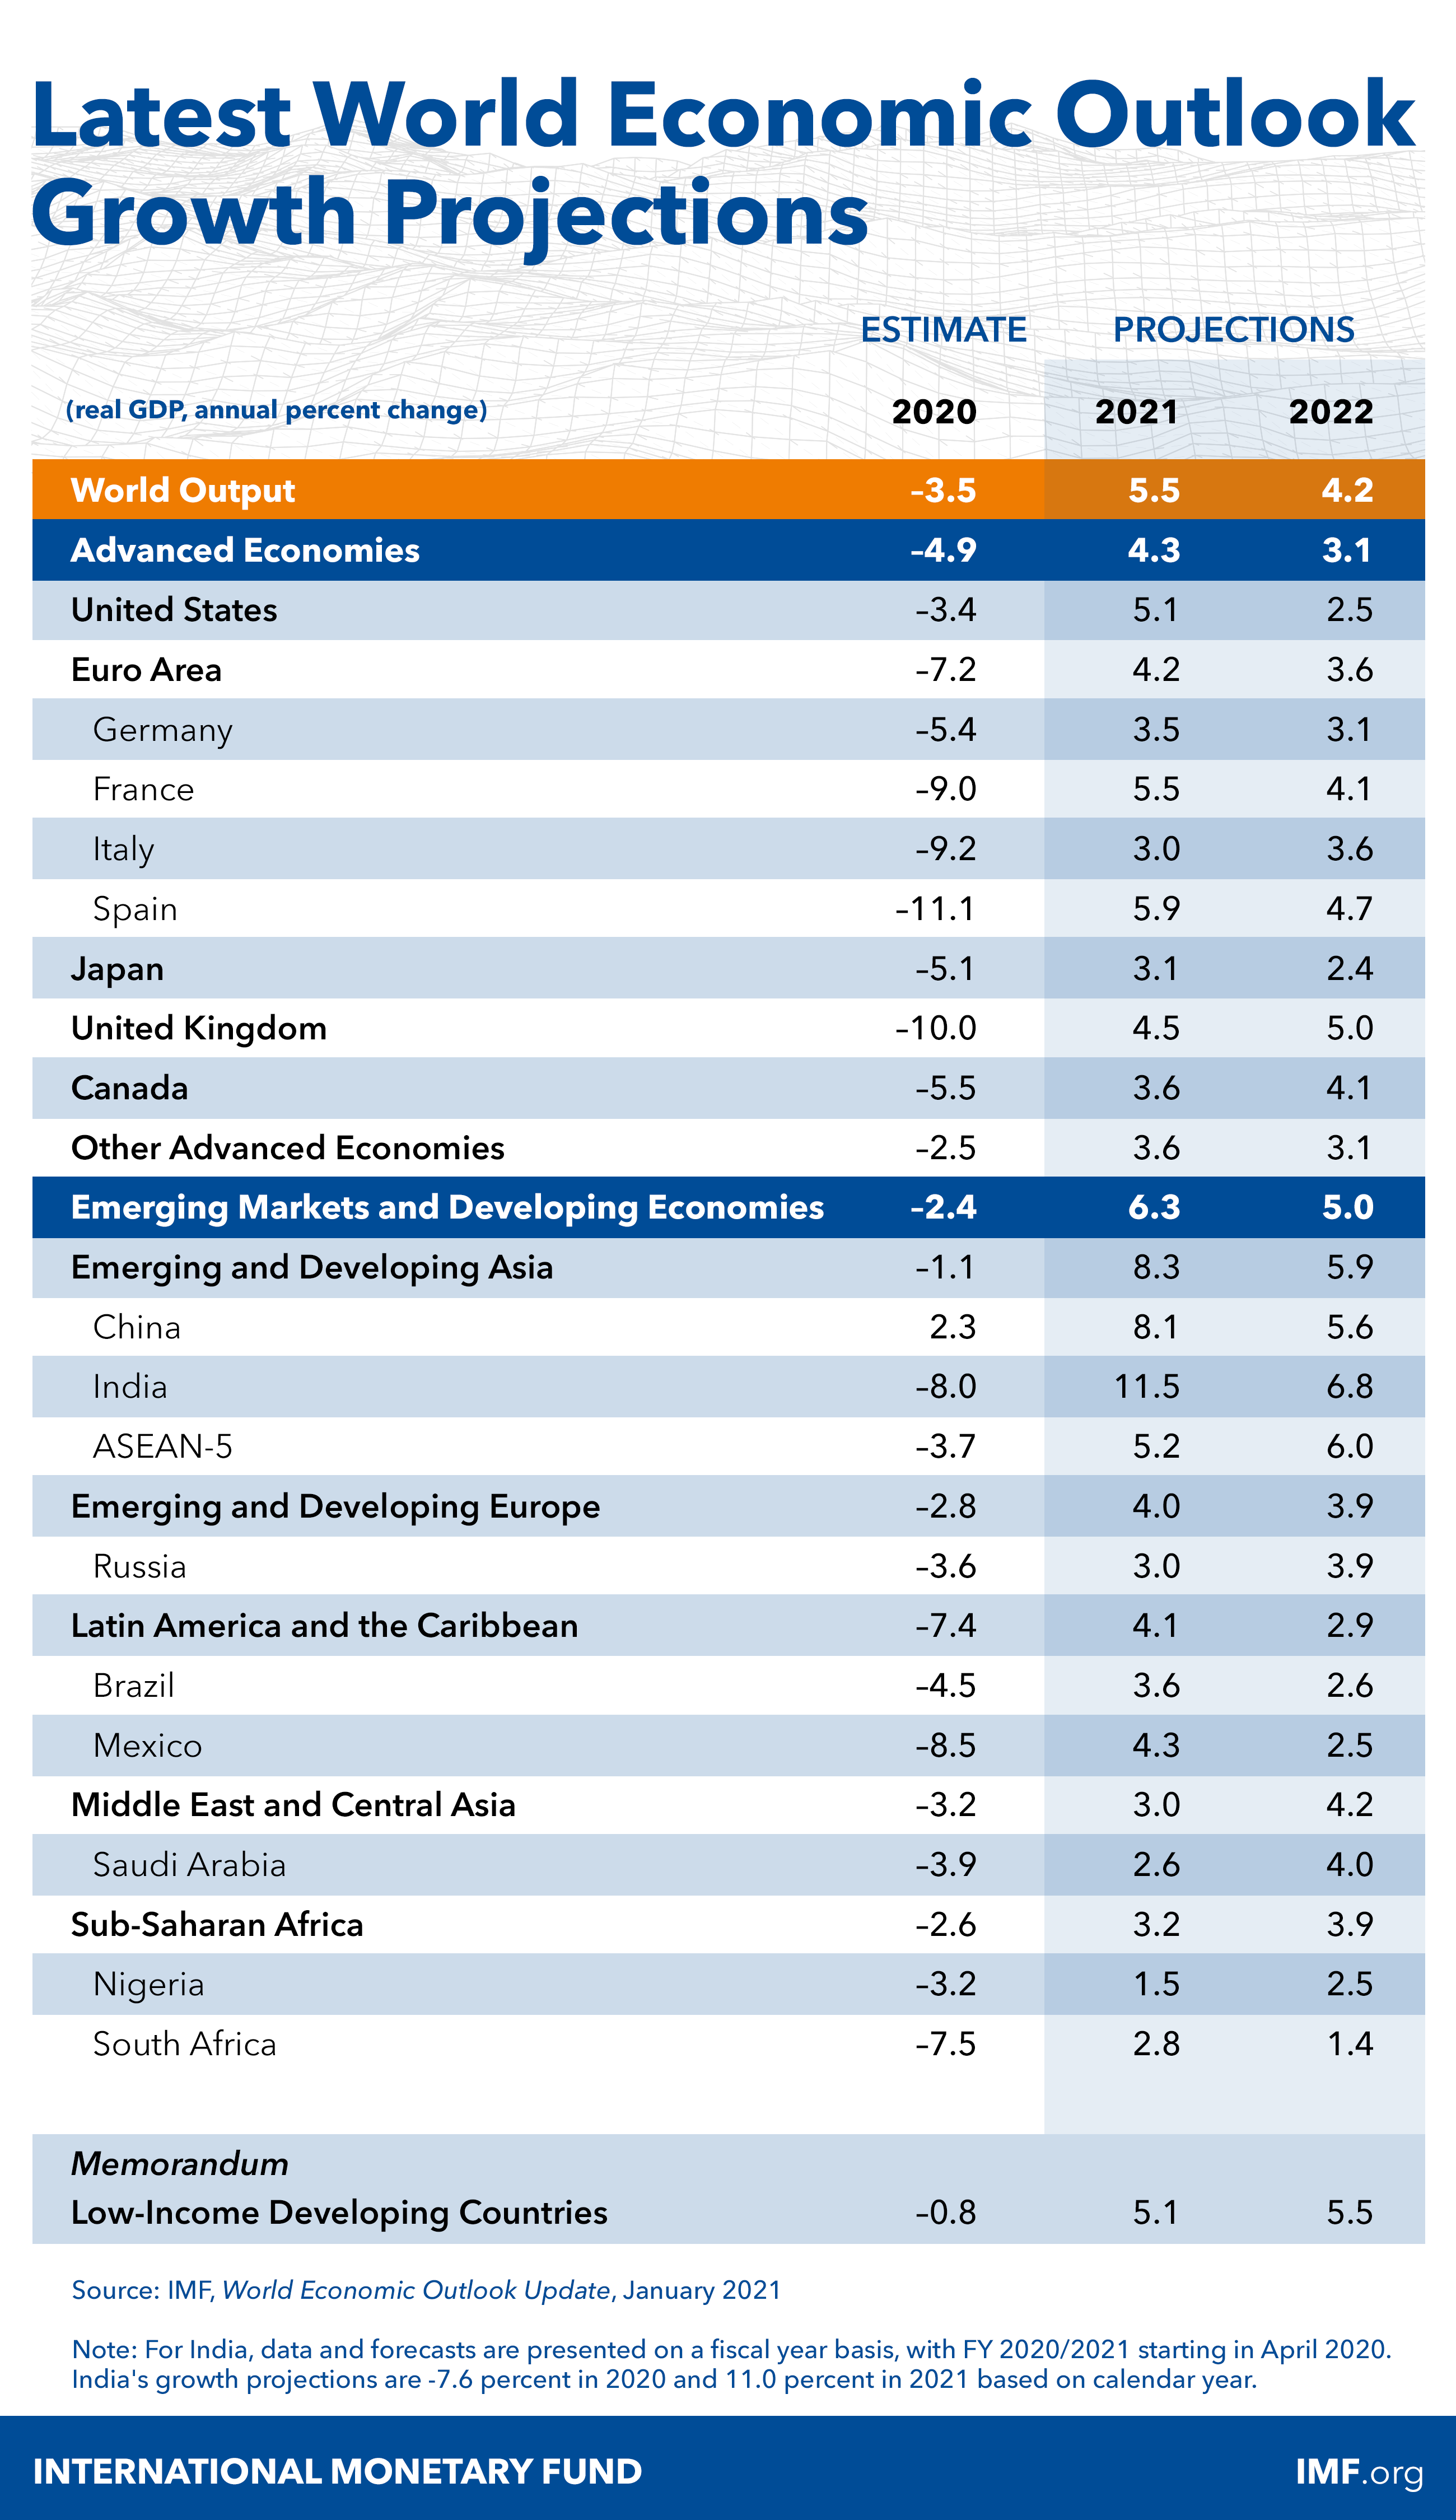 World Economic Outlook Update, January 2021, Table 1